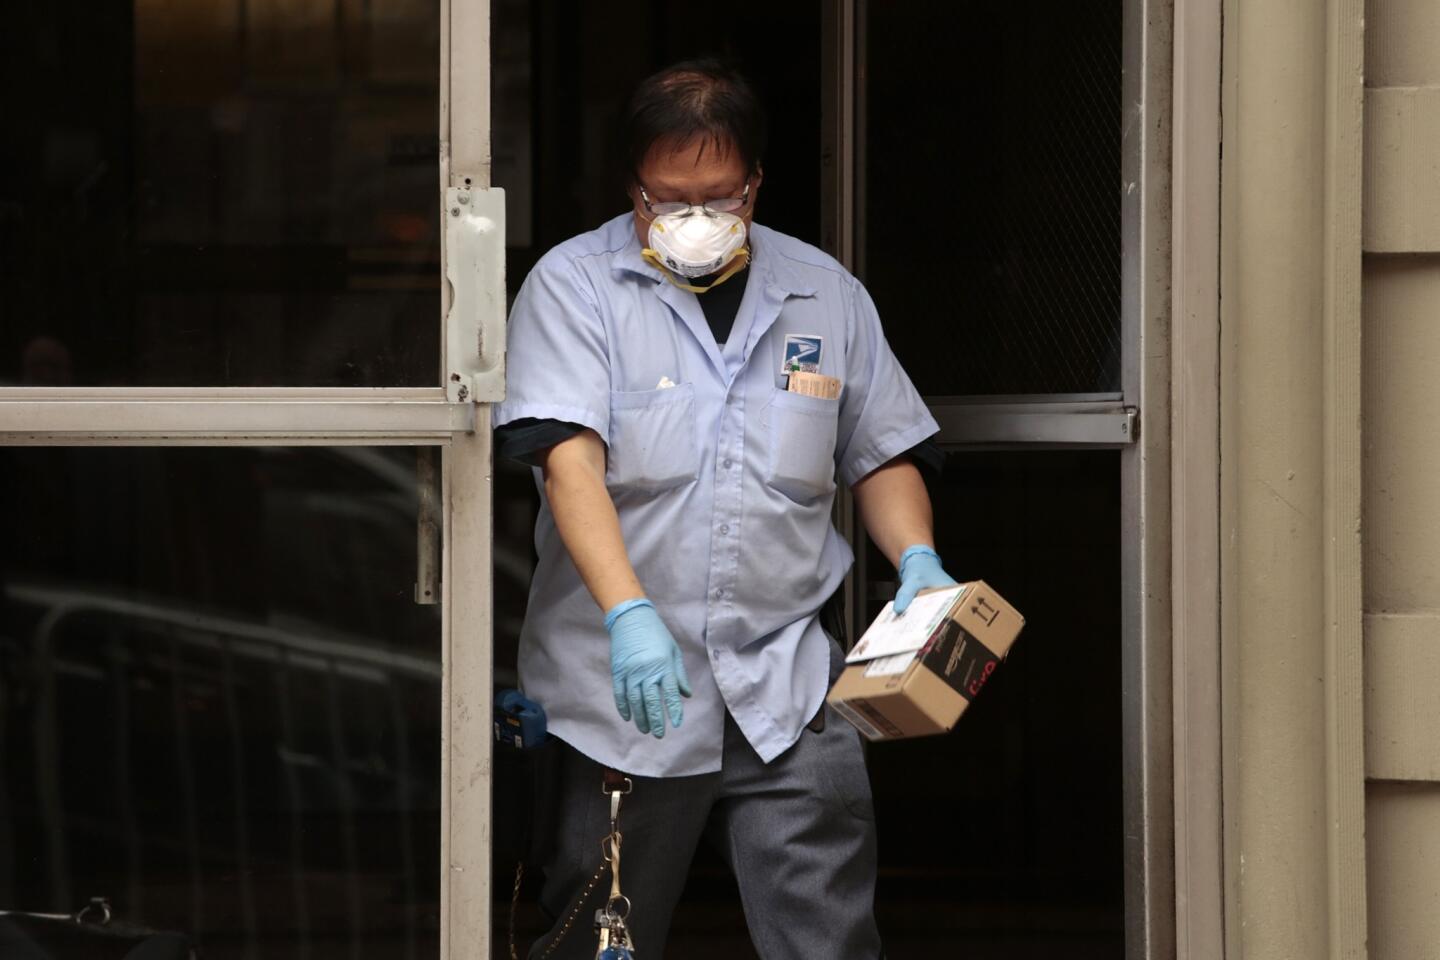 Keven Ngo wears a mask and gloves to deliver the mail at Dr. Craig Spencer's apartment building. He did not wear it on the rest of his route.